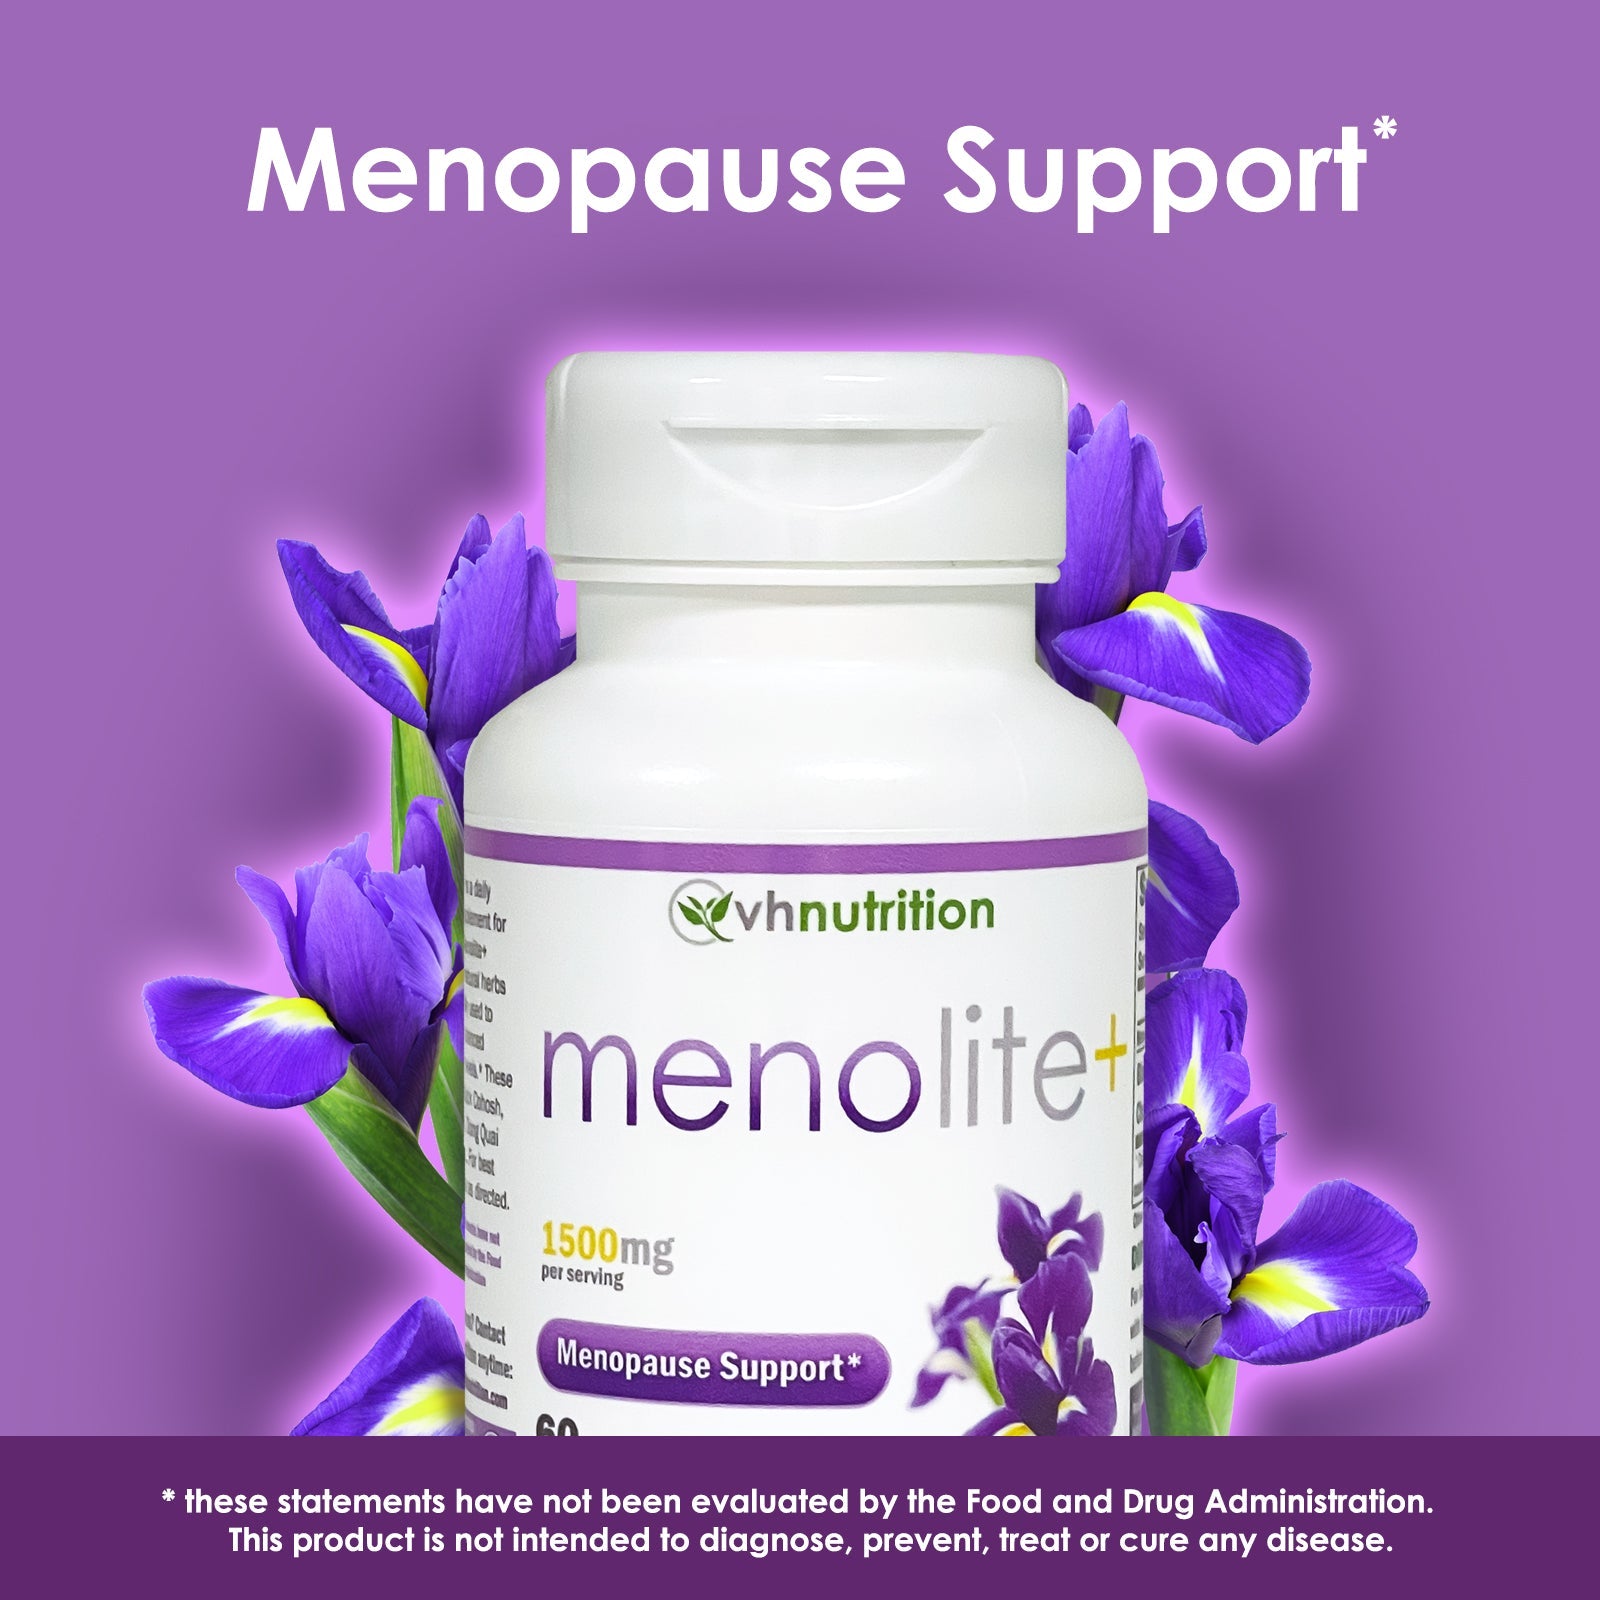 VH Nutrition MENOLITE+ | Menopause Supplement* for Women | Hormonal Support* and Hot Flash Relief* | Maximum Strength Natural Formula | 60 Capsules